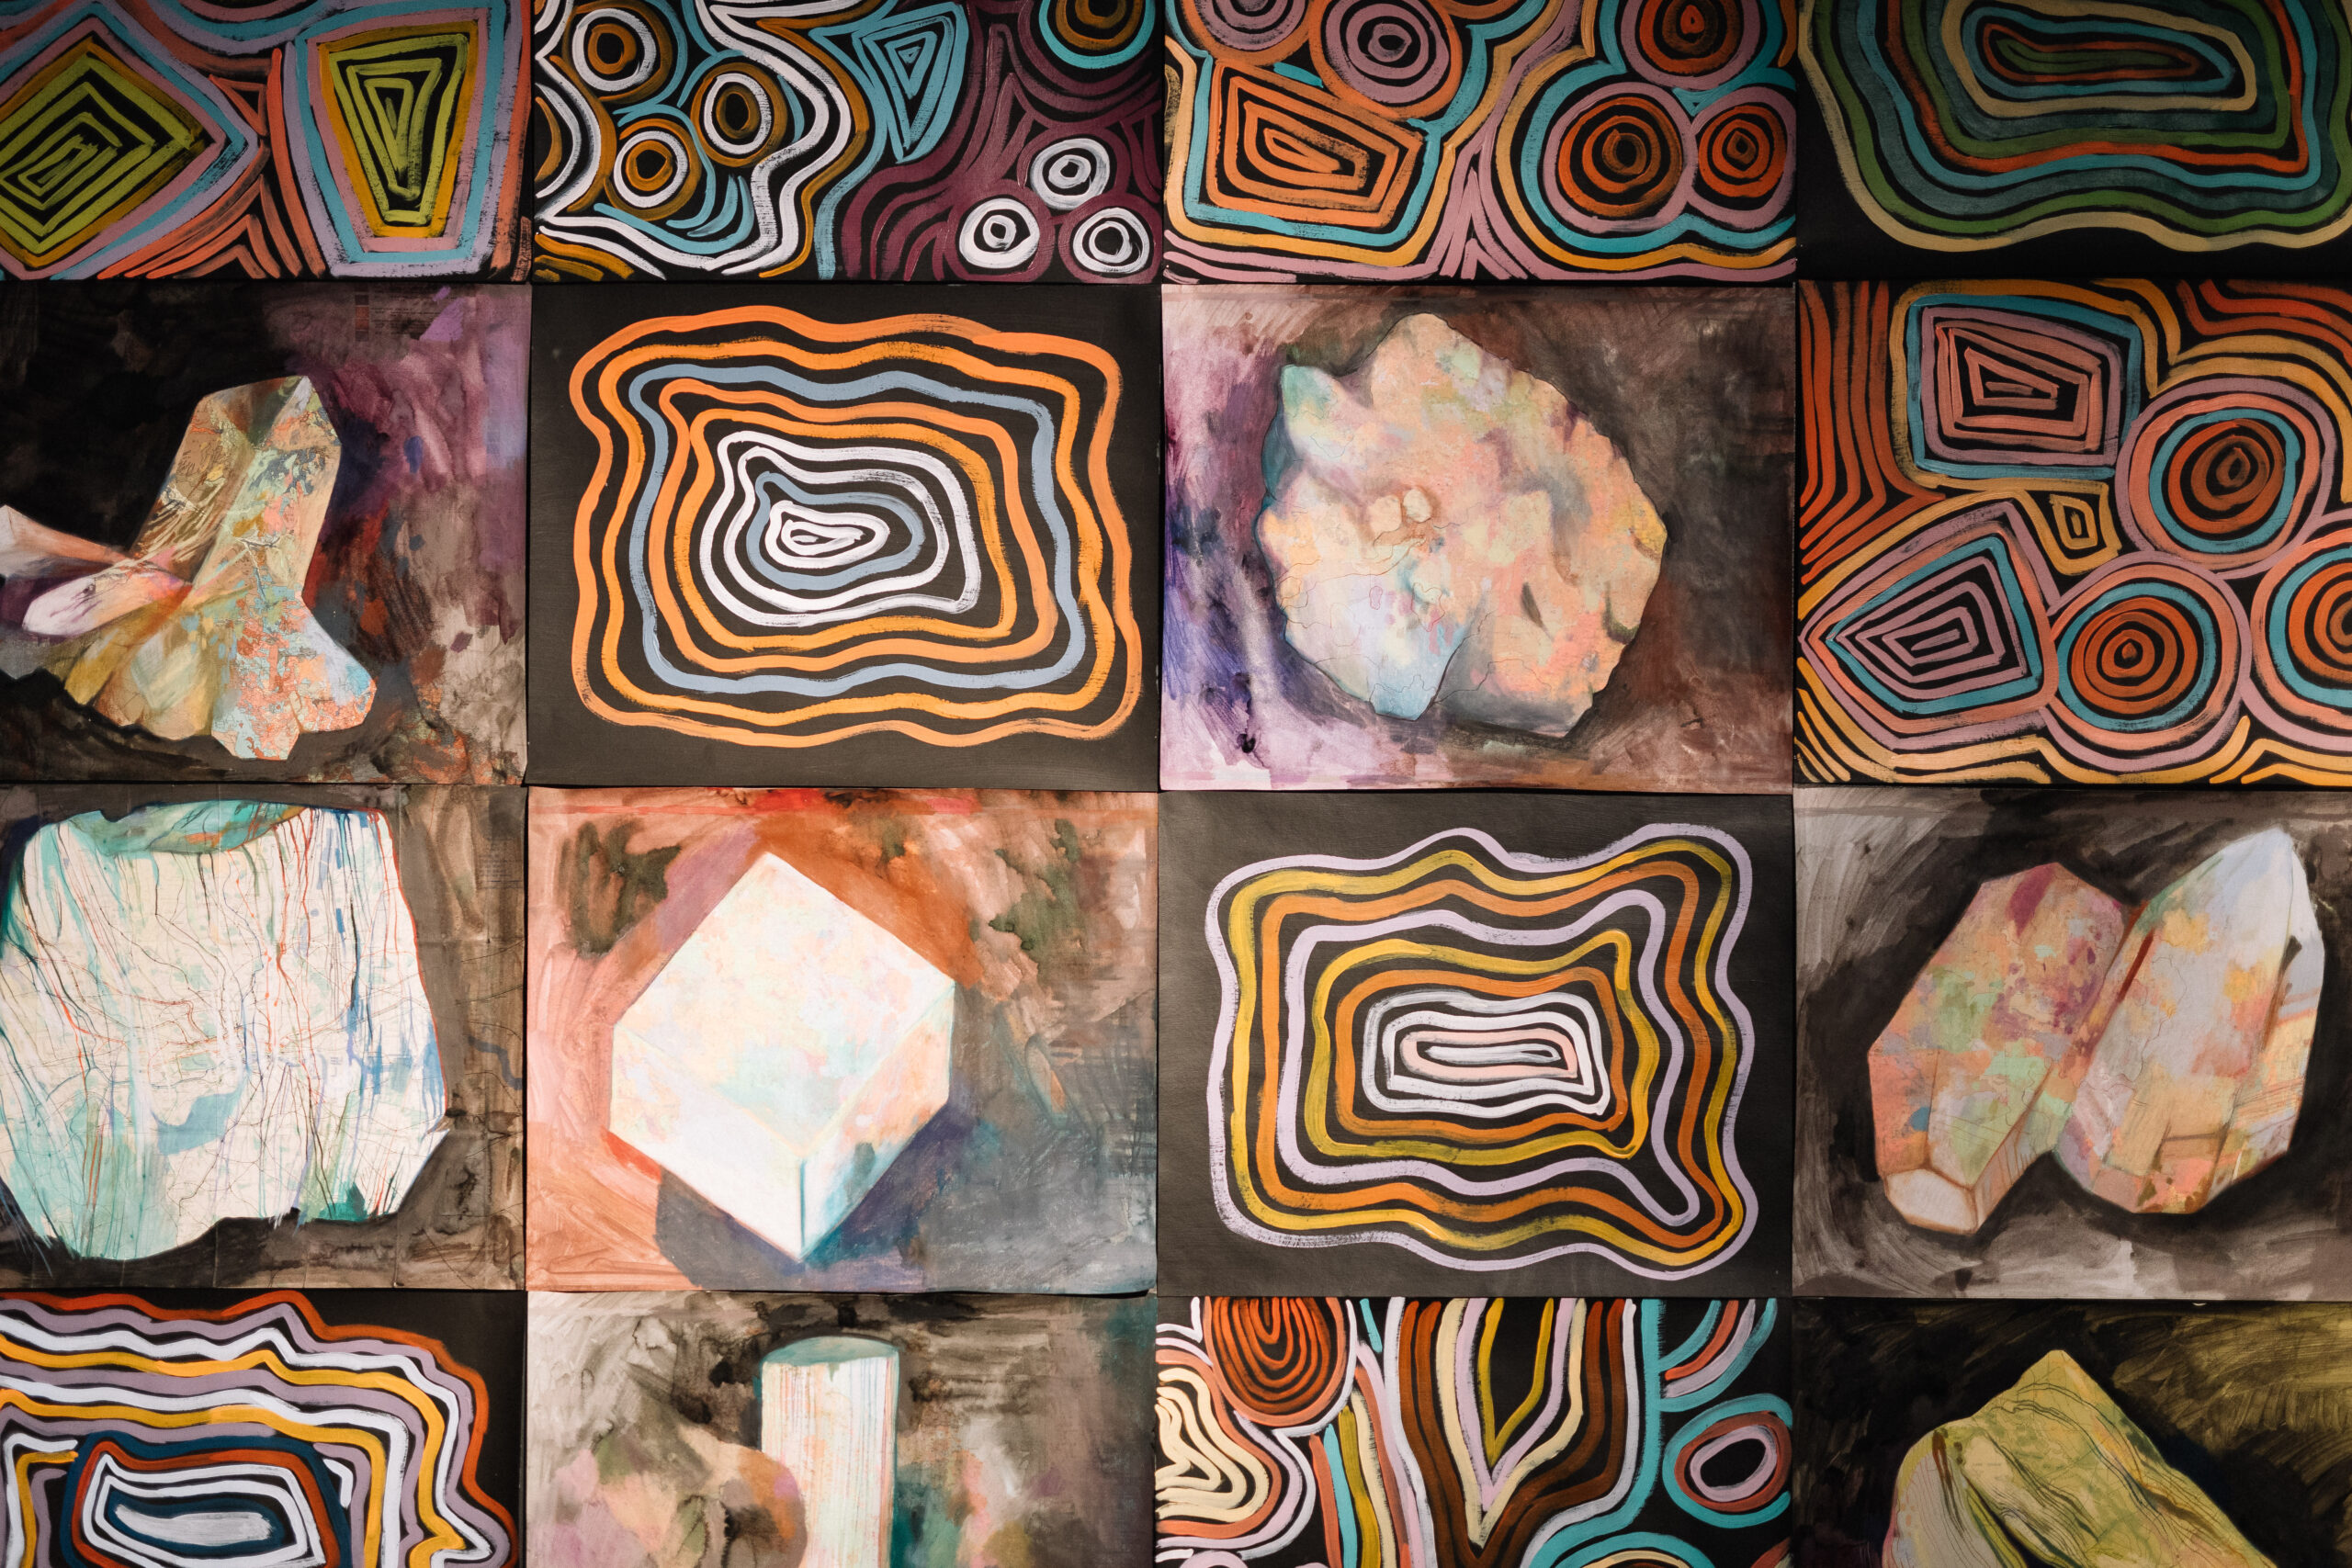 A grid of small paintings of minerals by Laura Wills and Jackie Saunders.